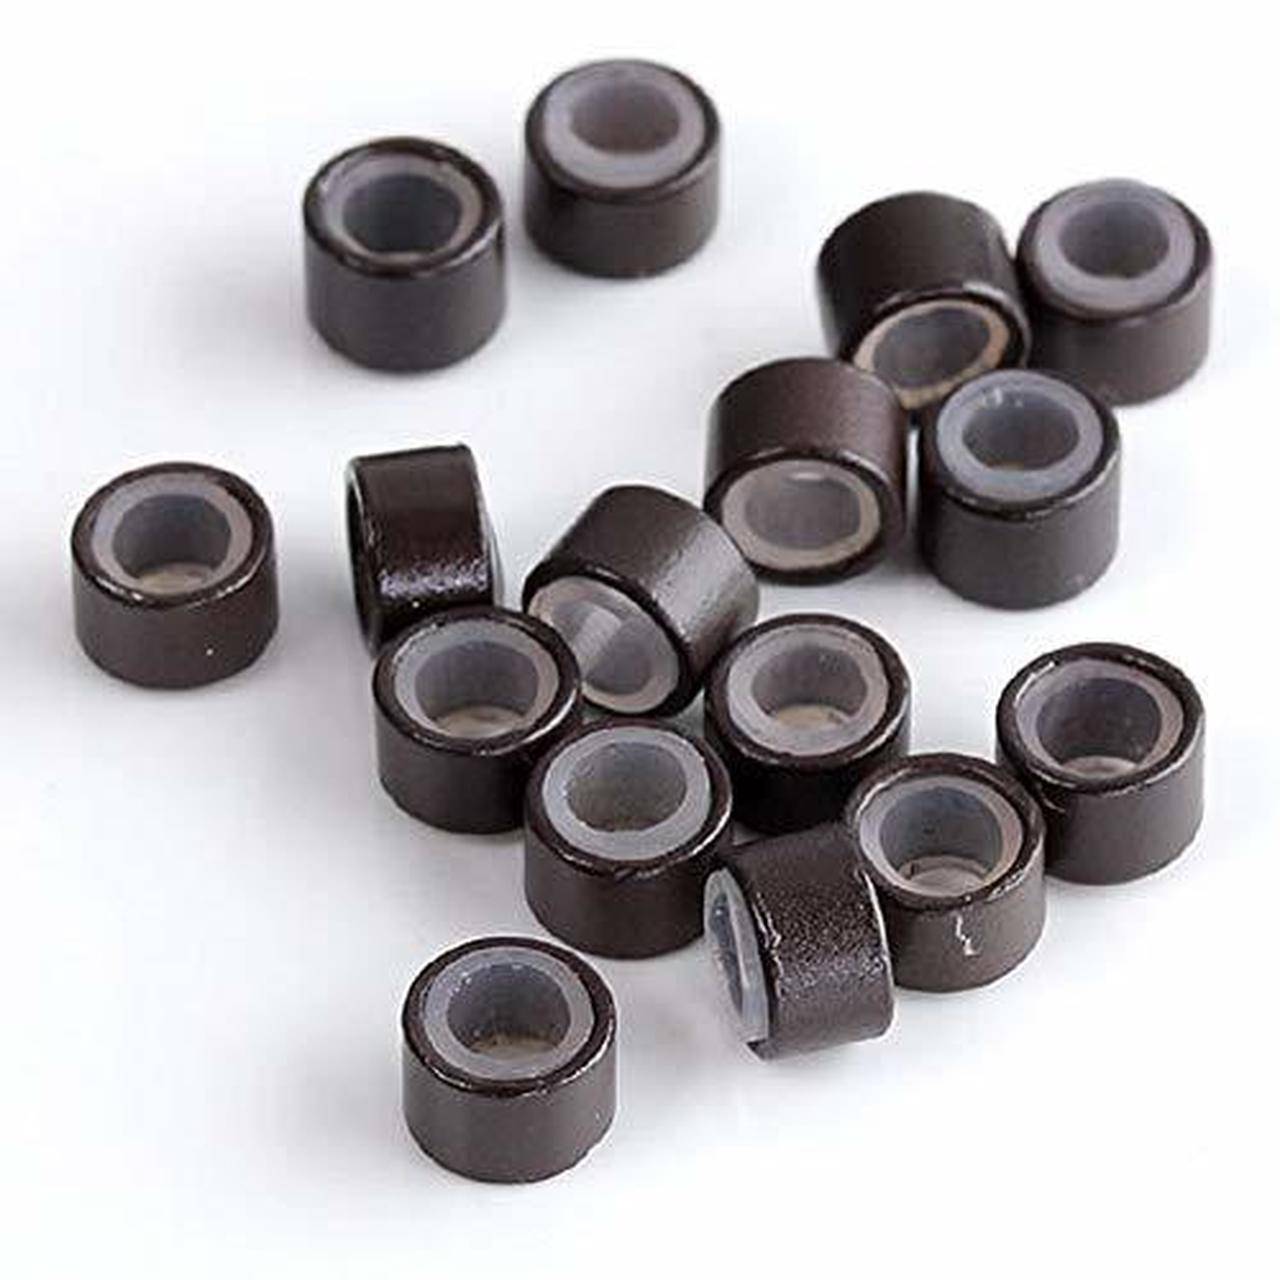 Copper Silicon Ring (Micro Link) 5.0 x 4.5 x 3.0 mm (500 pcs)-A - VIP Extensions